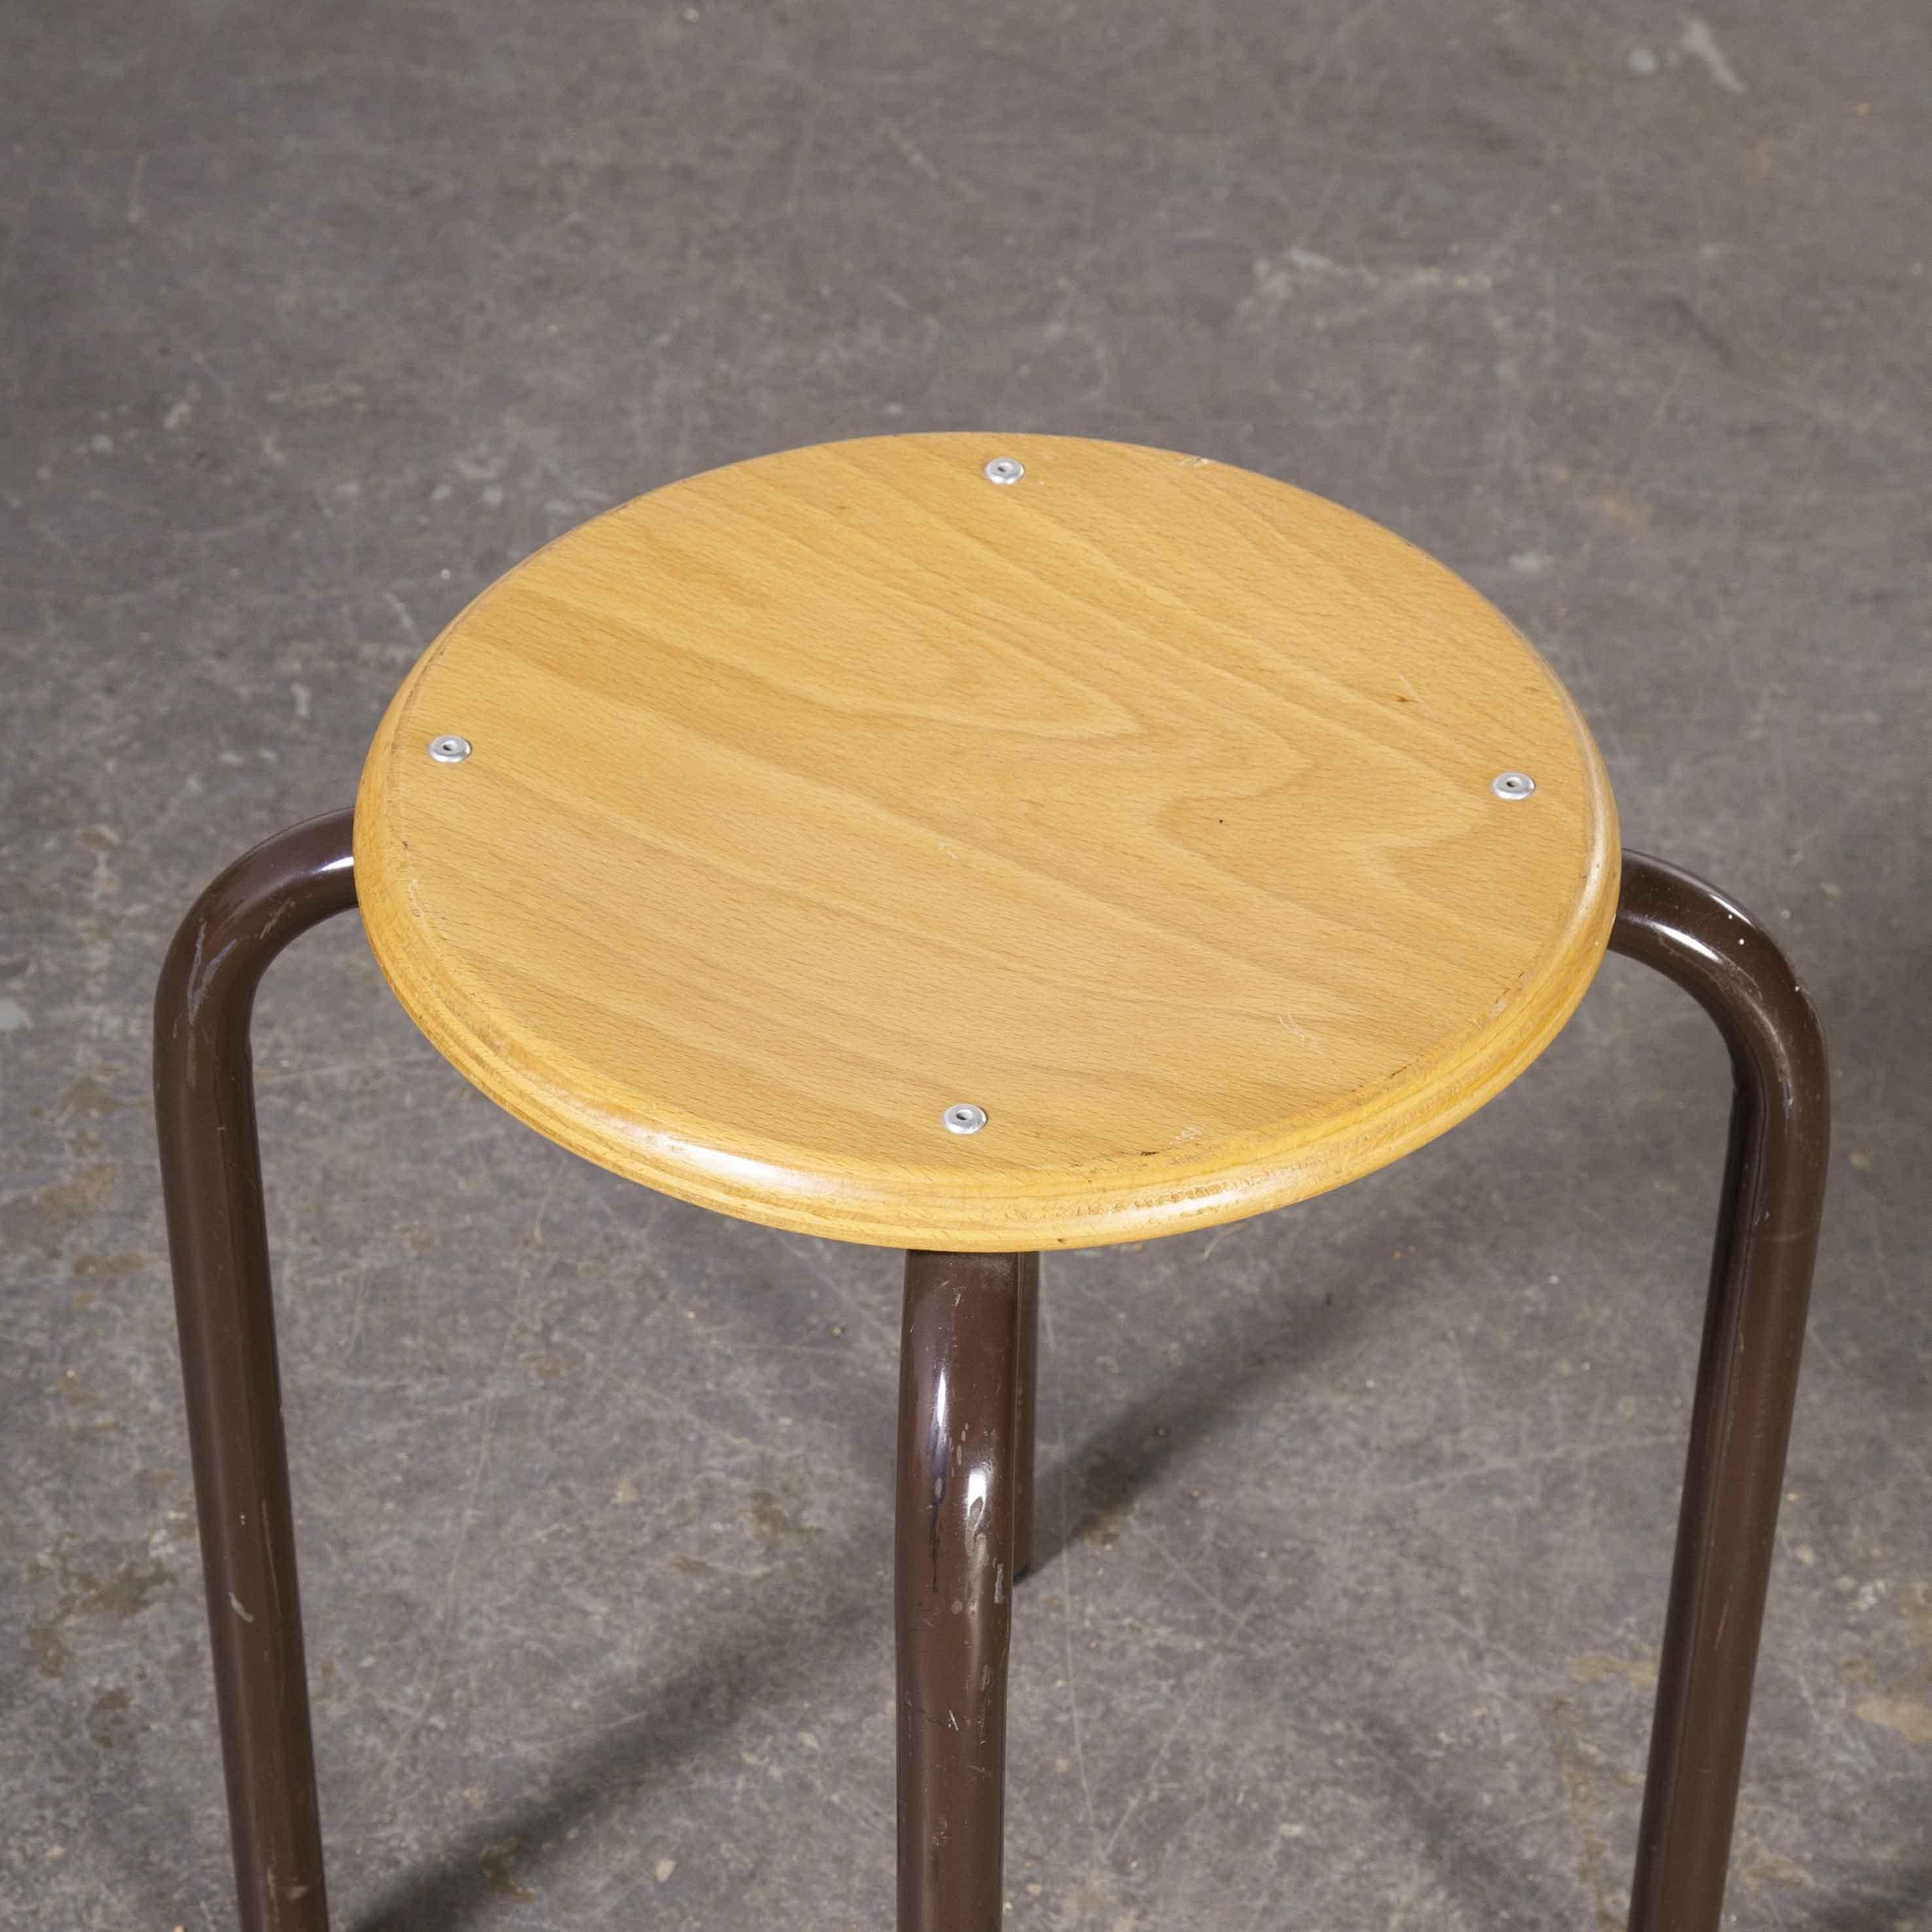 Beech 1960's Simple French Stacking School Stools, Brown, Varoious Quantities Availa